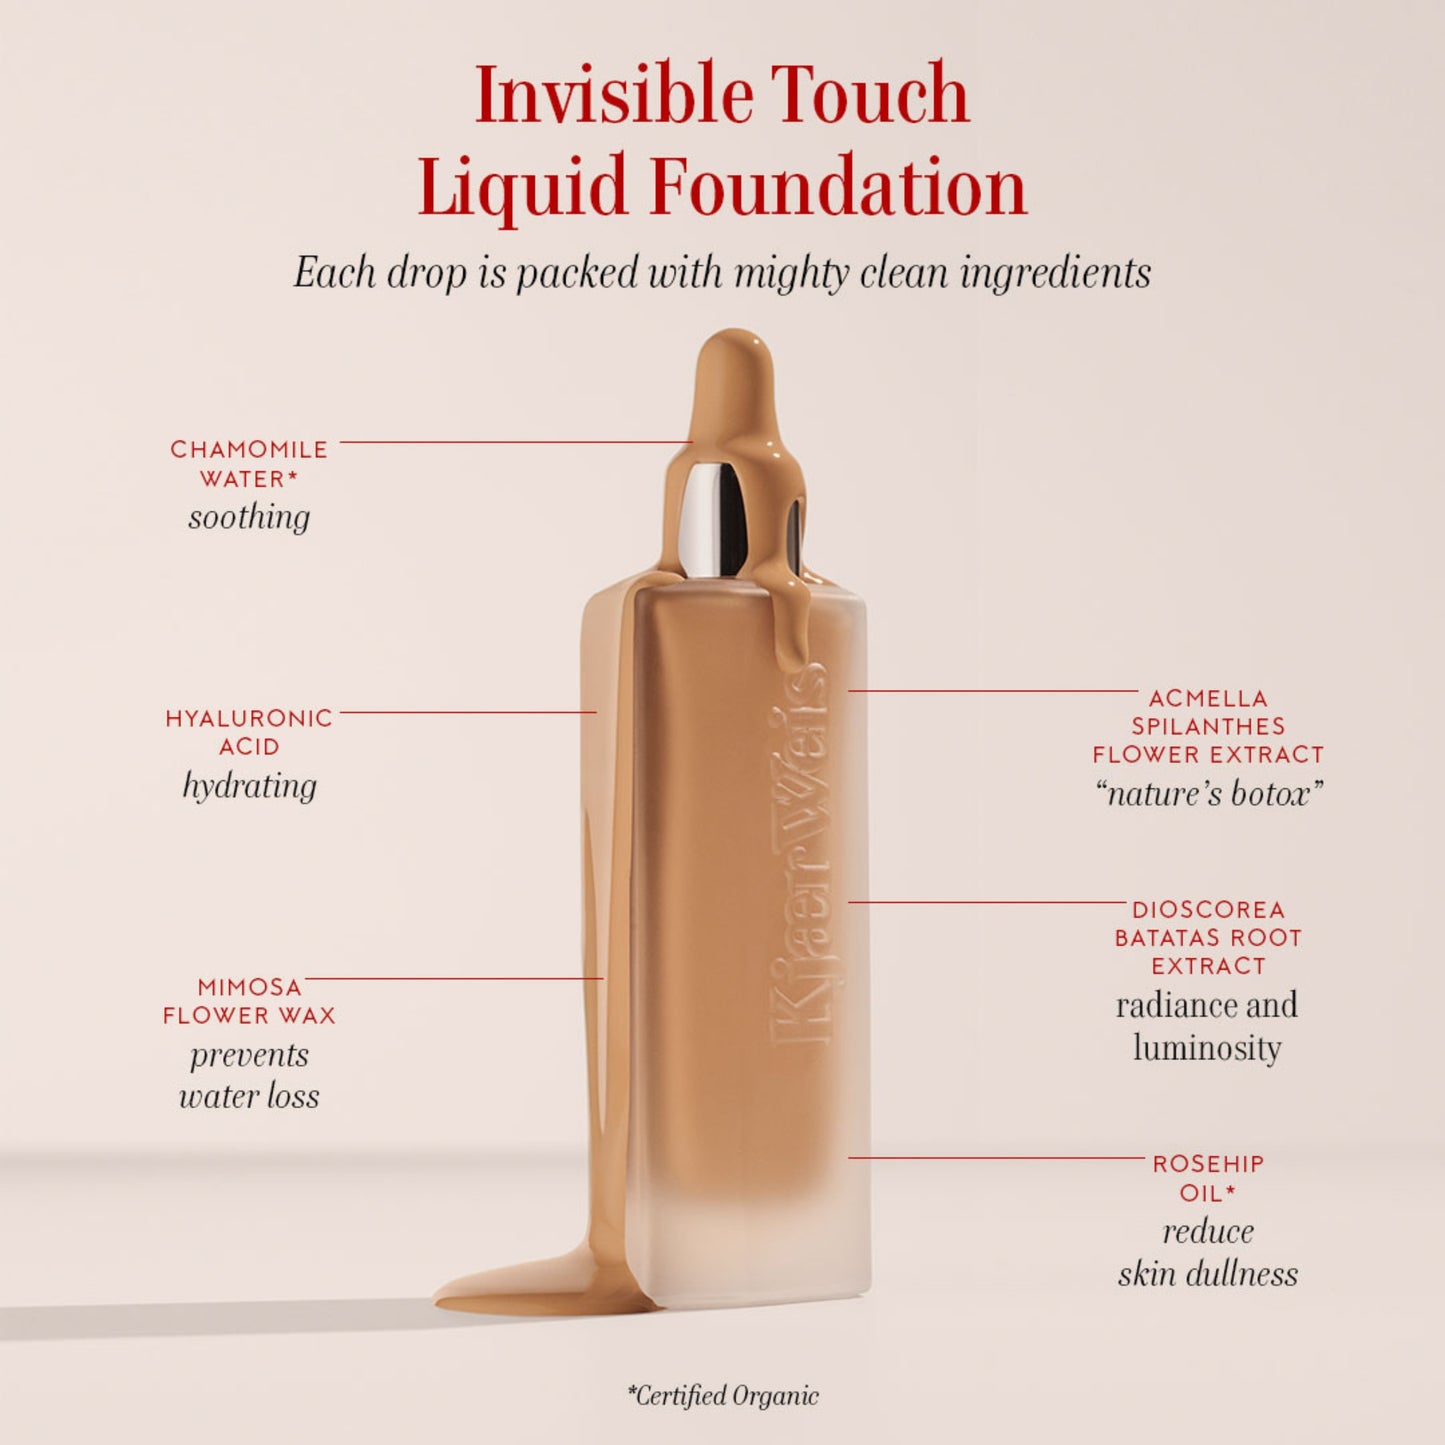 KW Invisible Touch Liquid Foundation bottle dripping with liquid foundation. The text around it reads: Invisible Touch Liquid Foundation. Each drop is packed with mighty clean ingredients. Chamomile Water*, soothing. Hyaluronic Acid, hydrating. Acmella Spilanthes Flower Extract, “nature’s botox”. Mimosa Flower Wax, prevents water loss. Dioscorea Batatas Root Extract, radiance and luminosity. Rosehip Oil*, reduce skin dullness. *certified organic. 